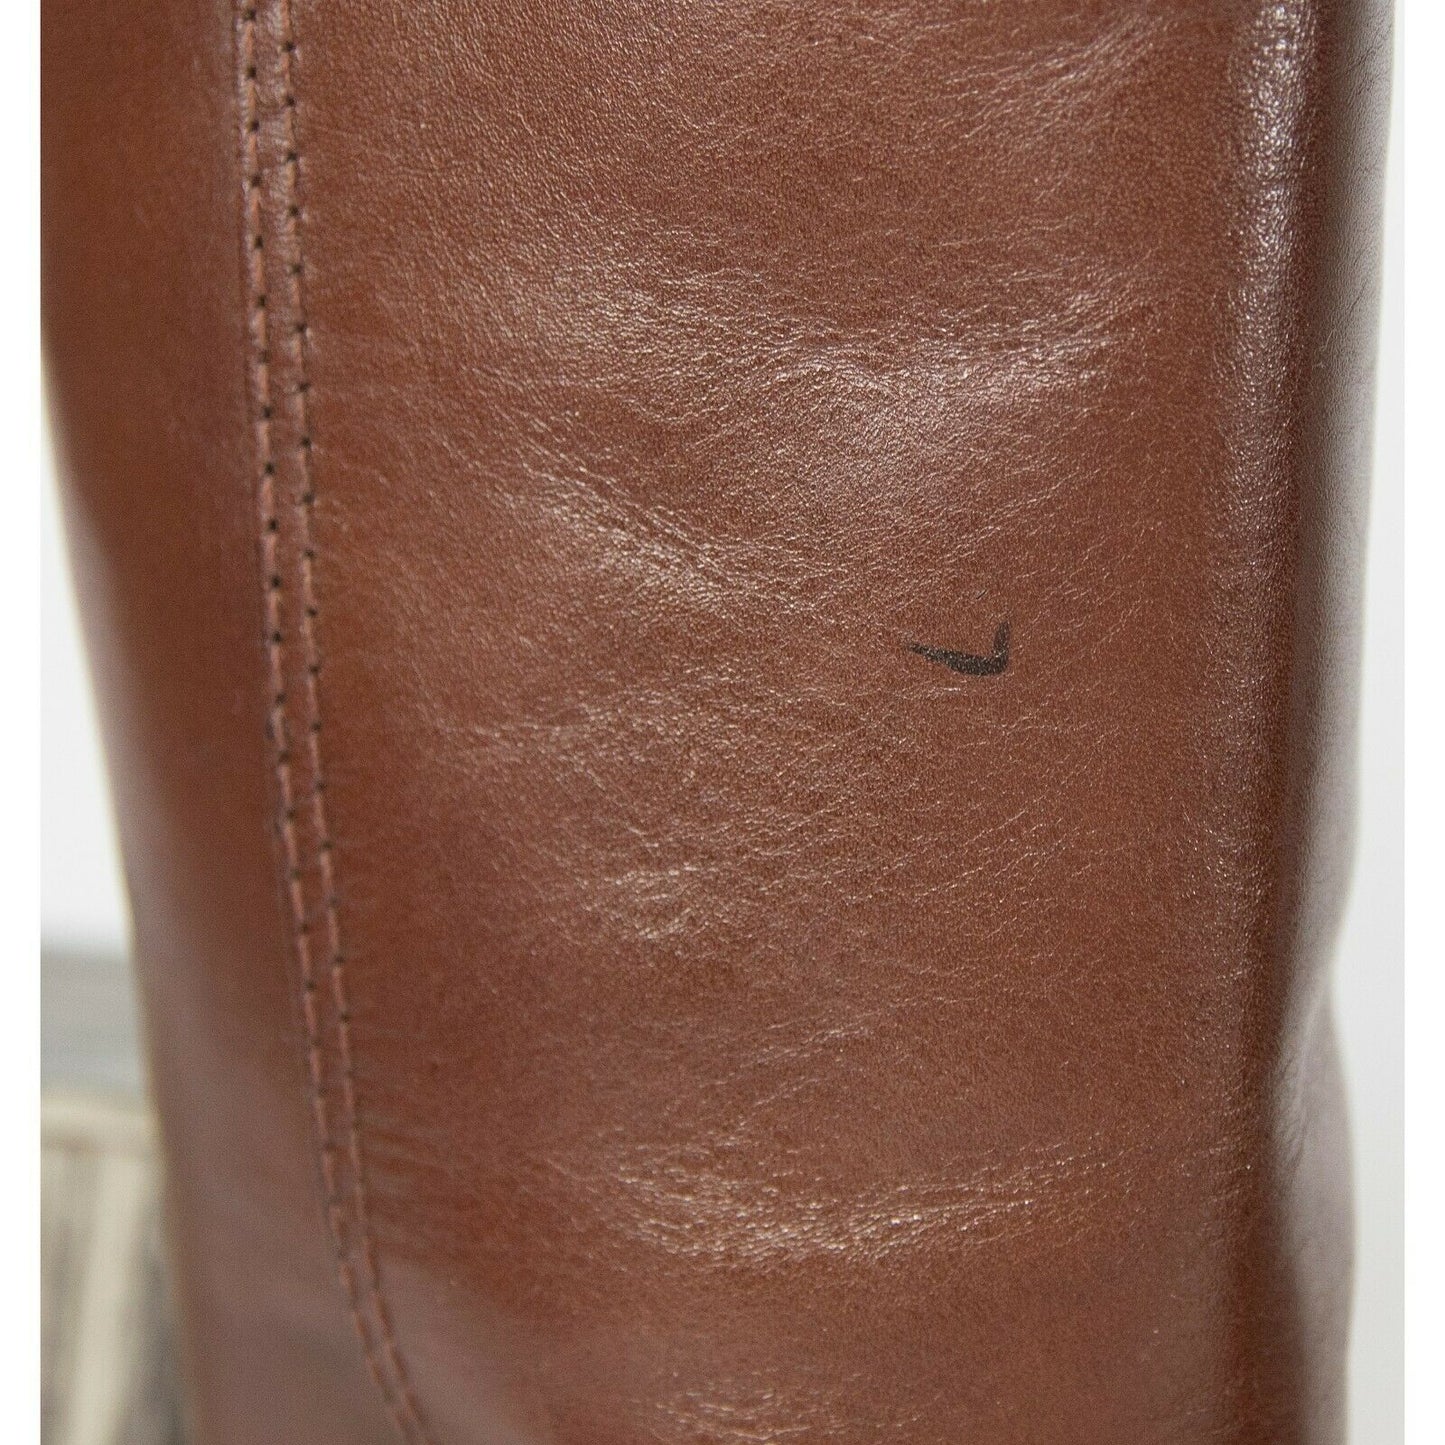 Tory Burch Rustic Brown Derby Smooth Leather Tall Riding Boots Sz 5.5